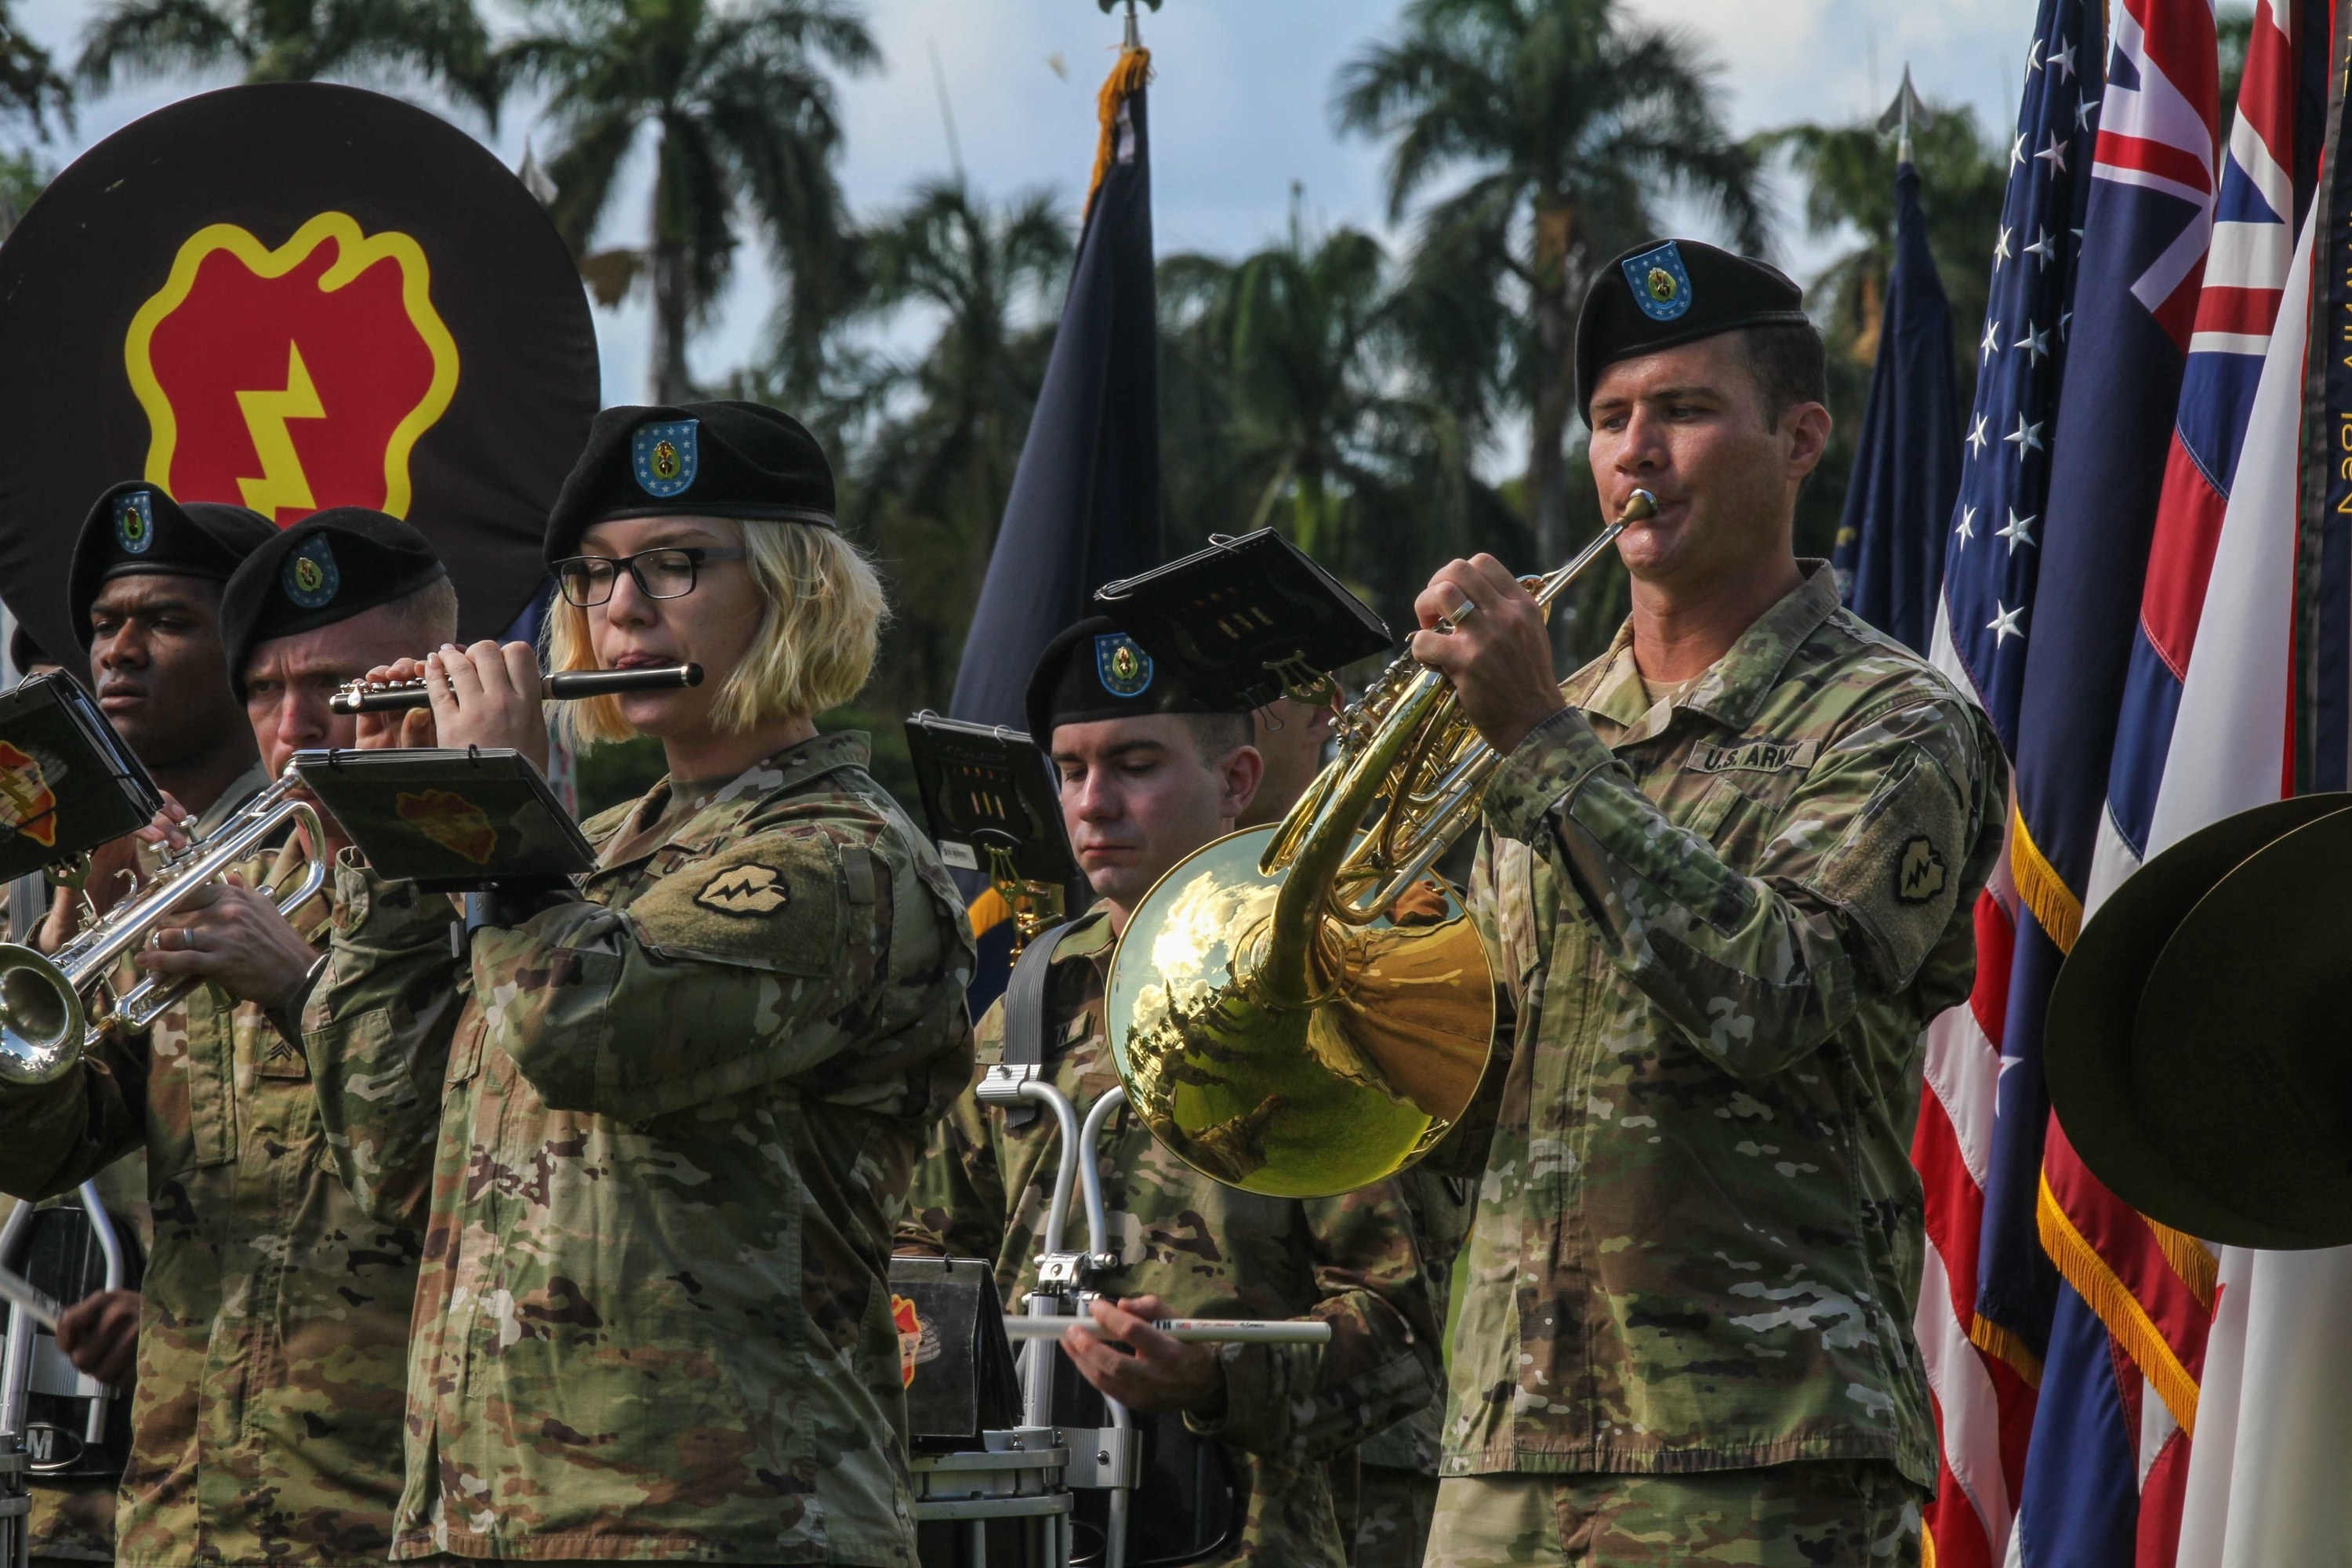 People in Army uniforms playing in a band in front of palm trees and flags